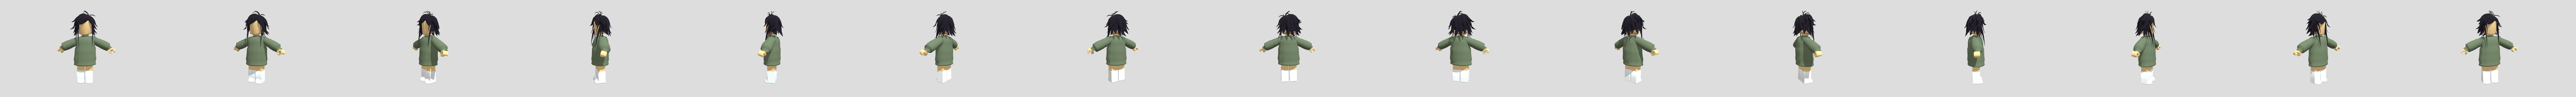 Roblox Girl 3d Model By Awesomeambz Awesomeambz 0afc20a - roblox modles api